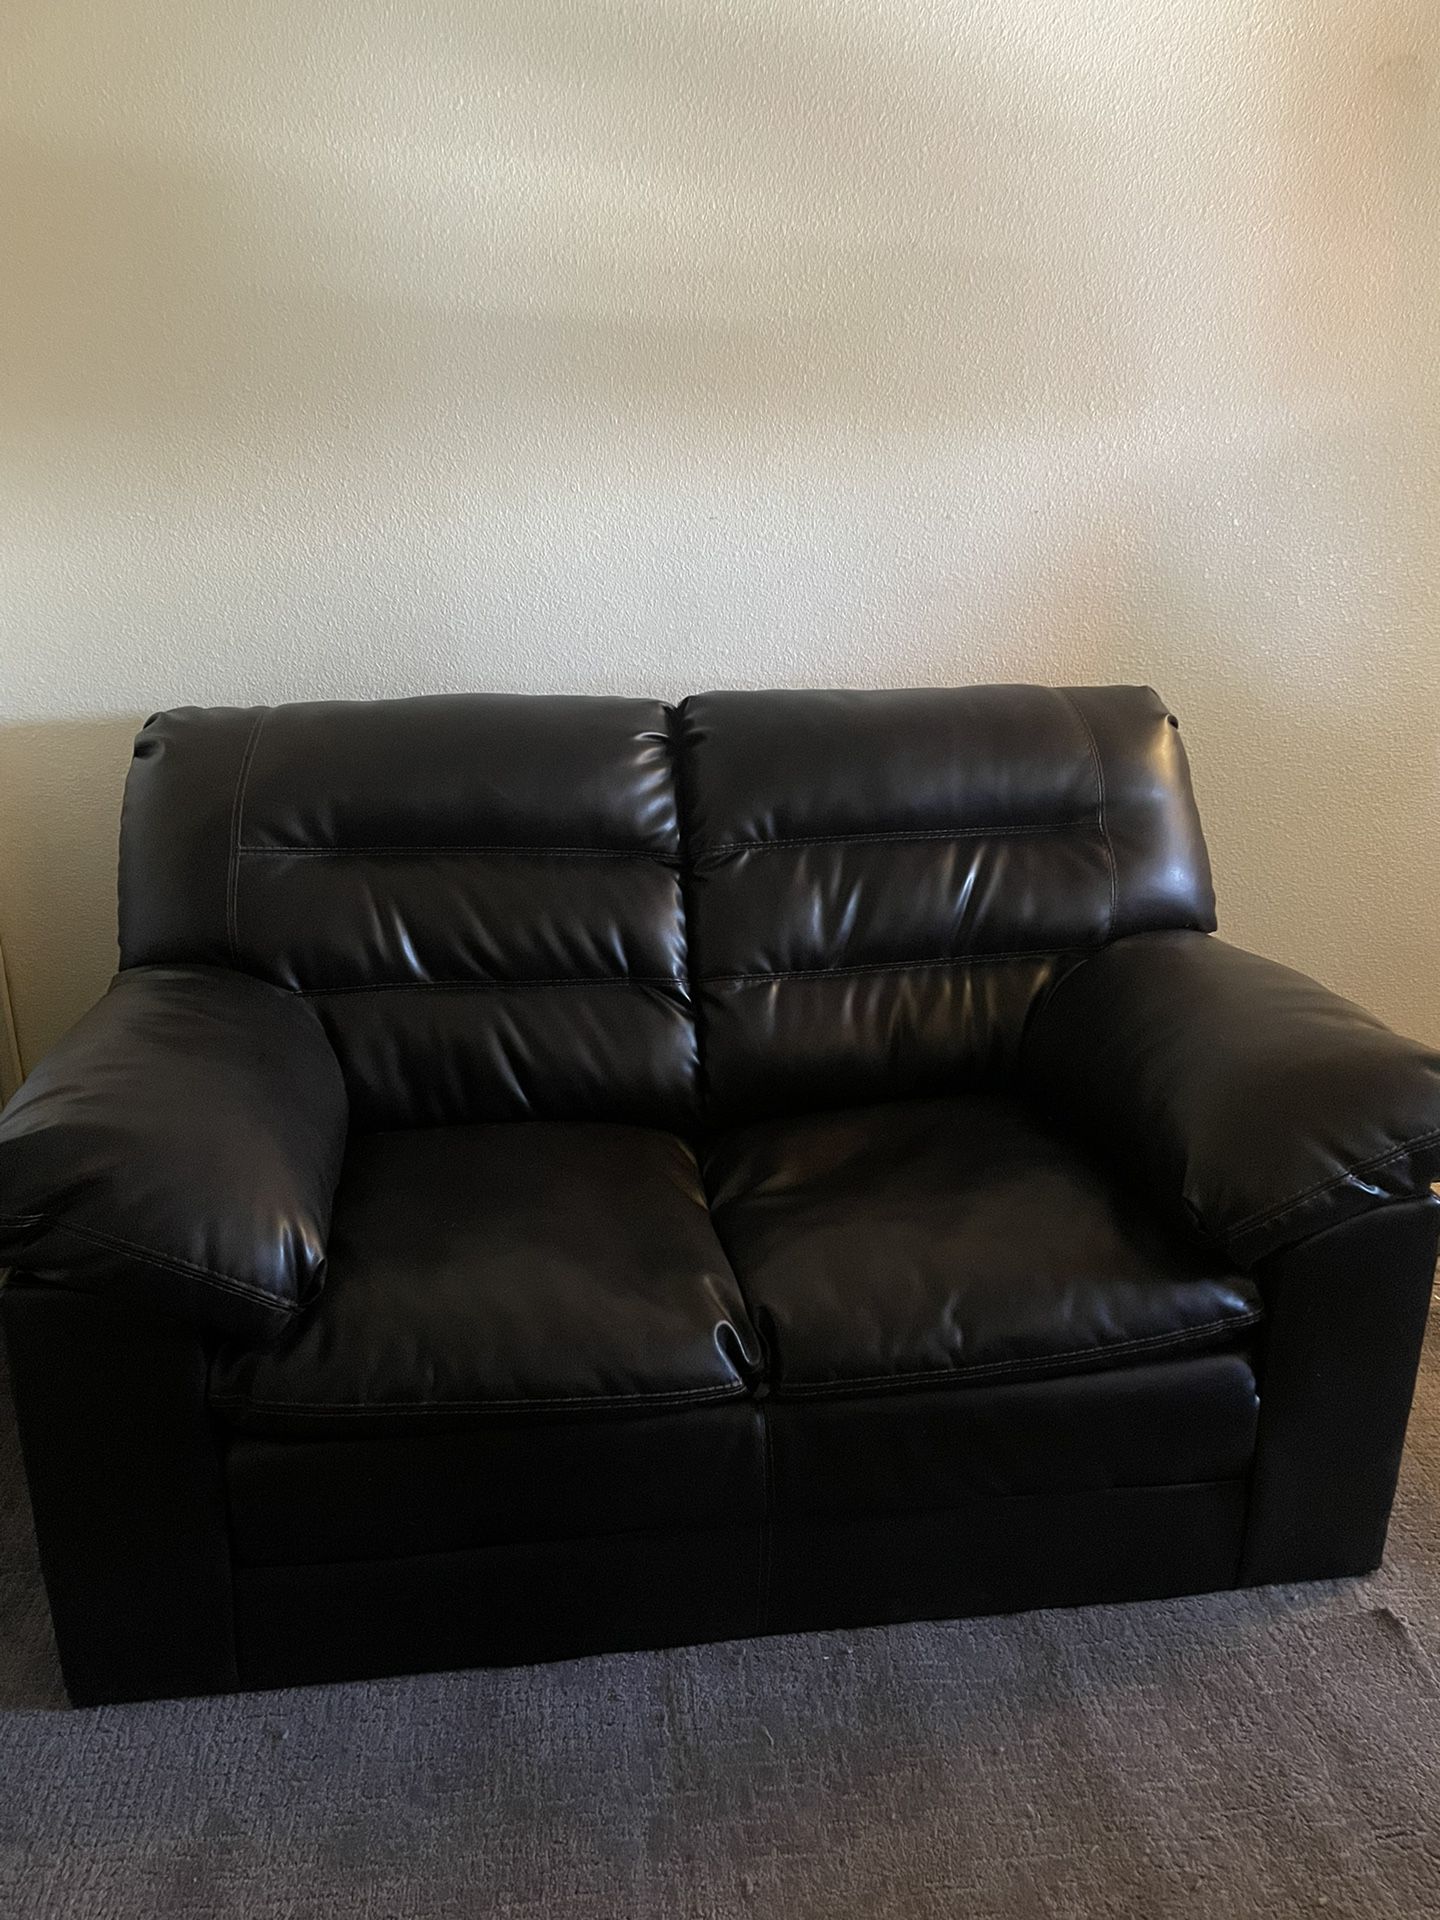 Leather Loveseat And Matching Recliner Chair